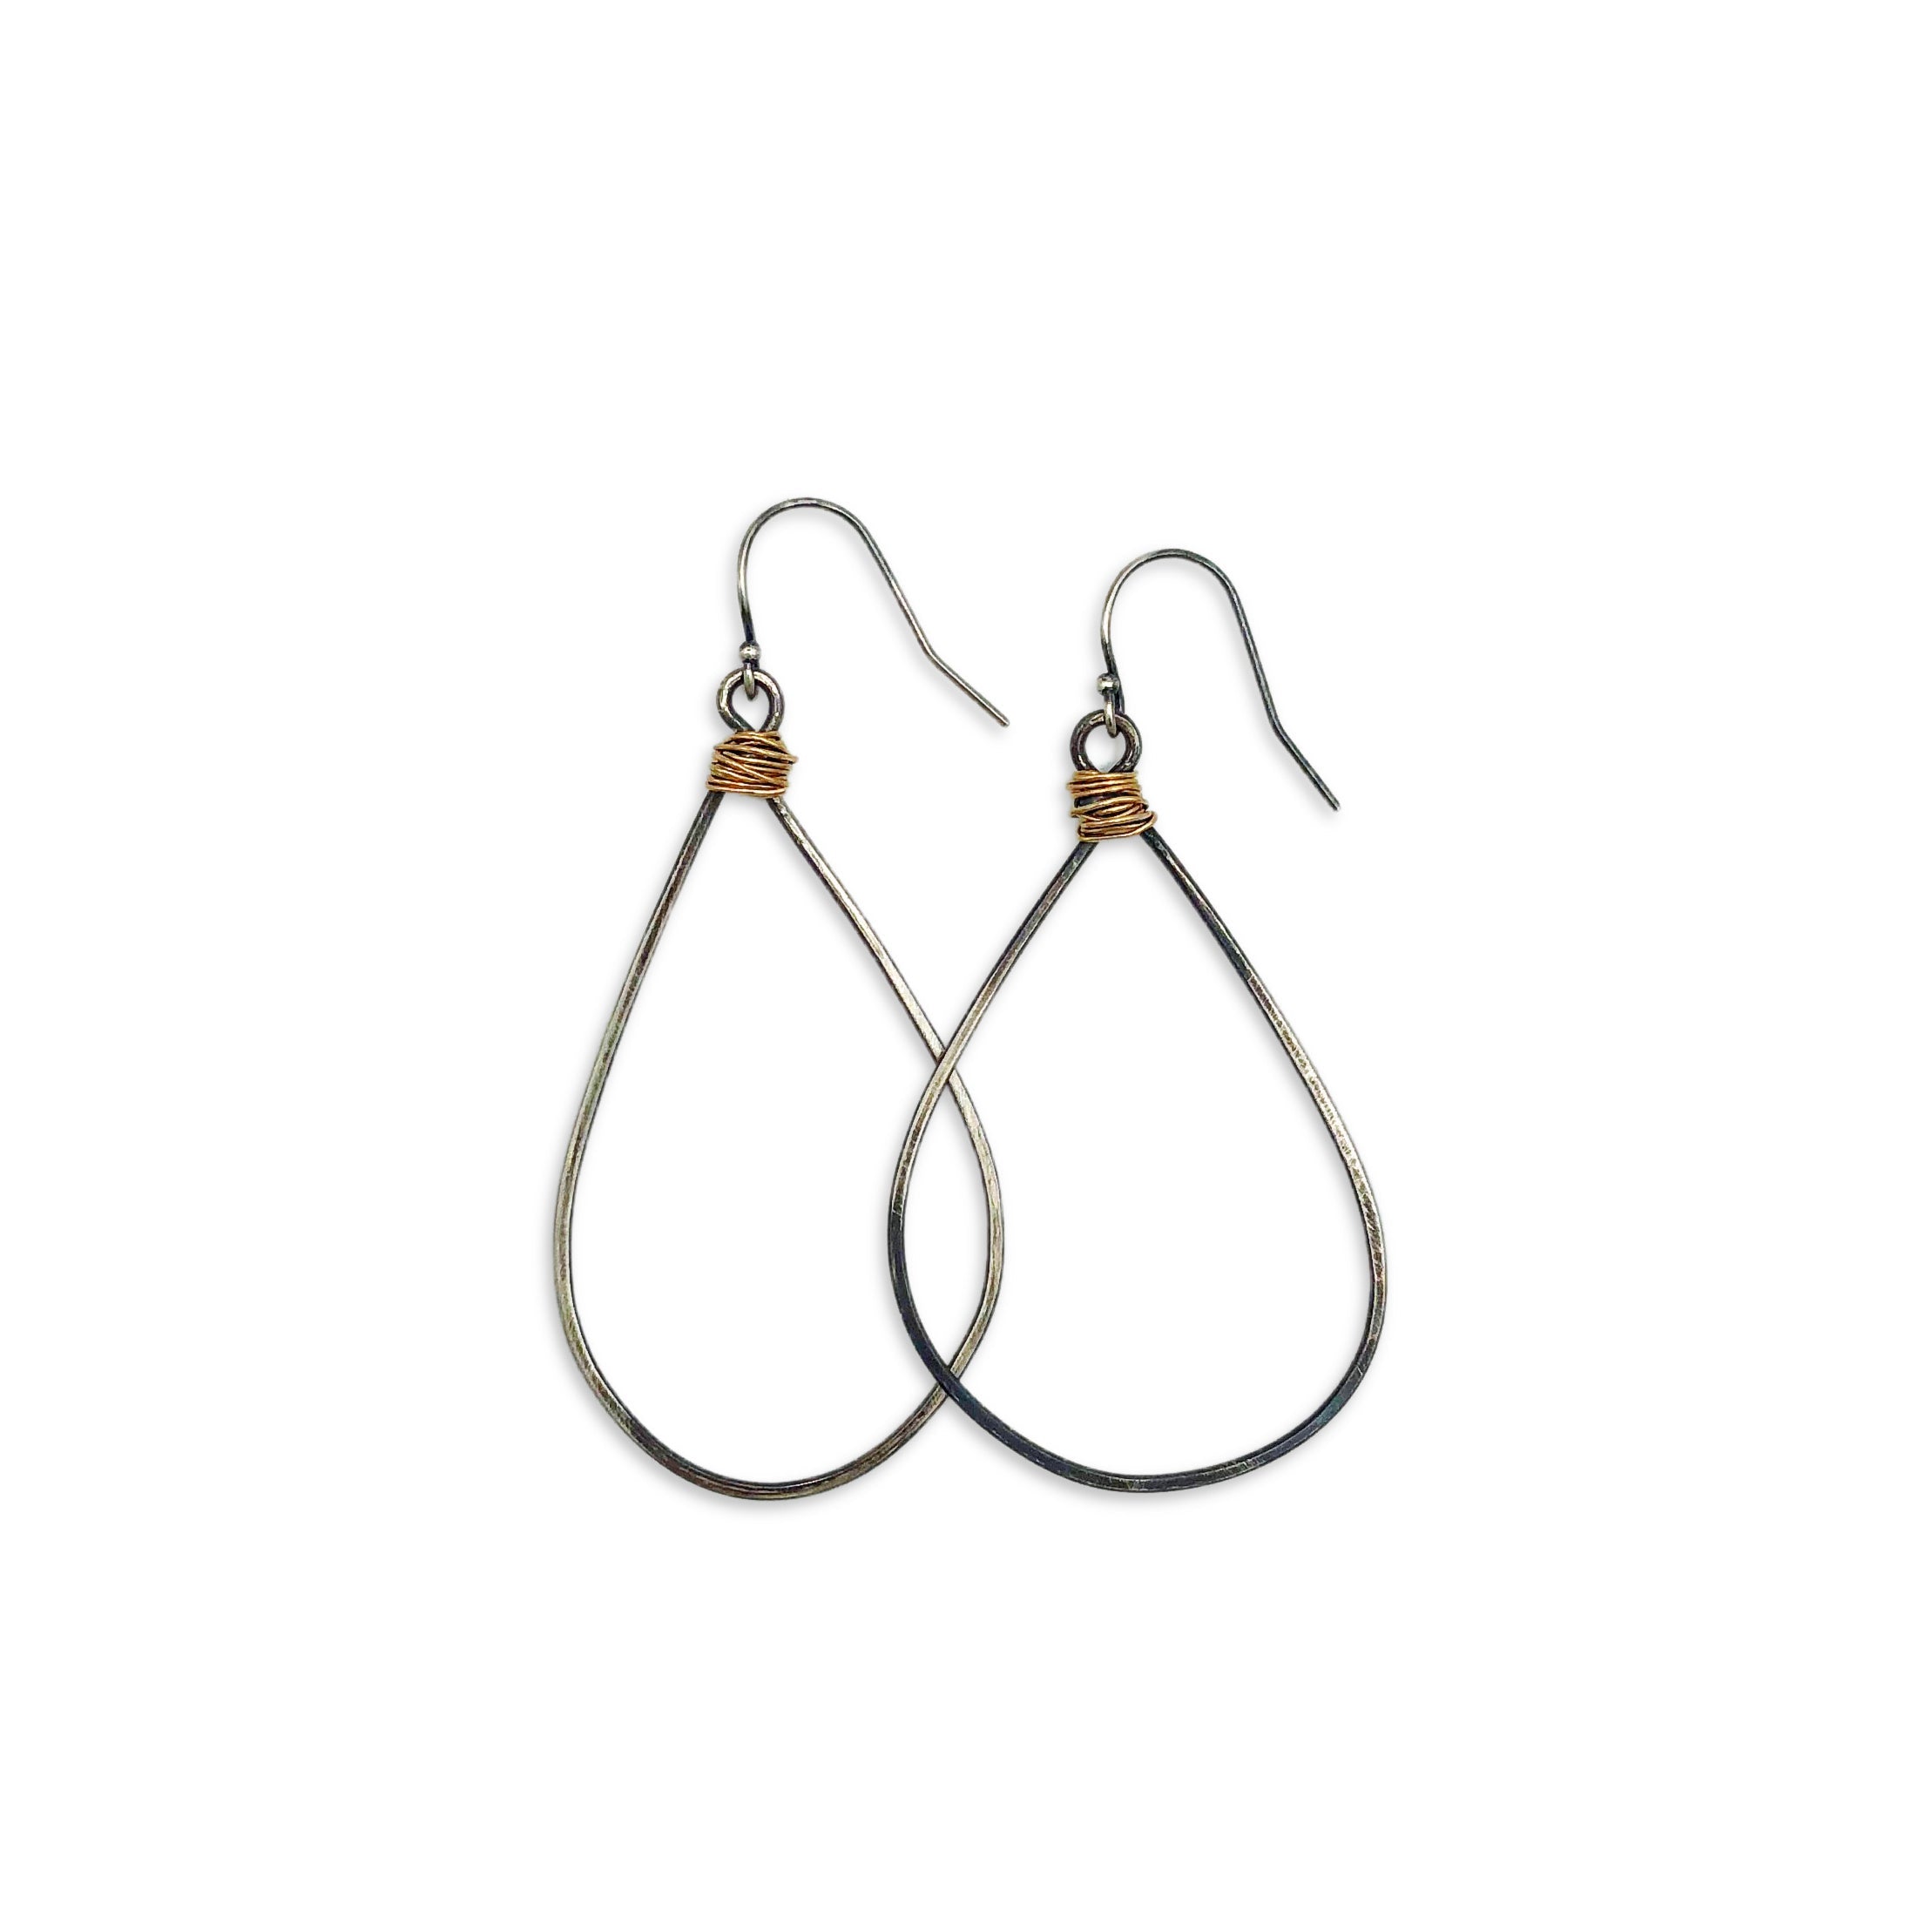 Hammered Teardrop Hoop Earrings with Gold and Silver